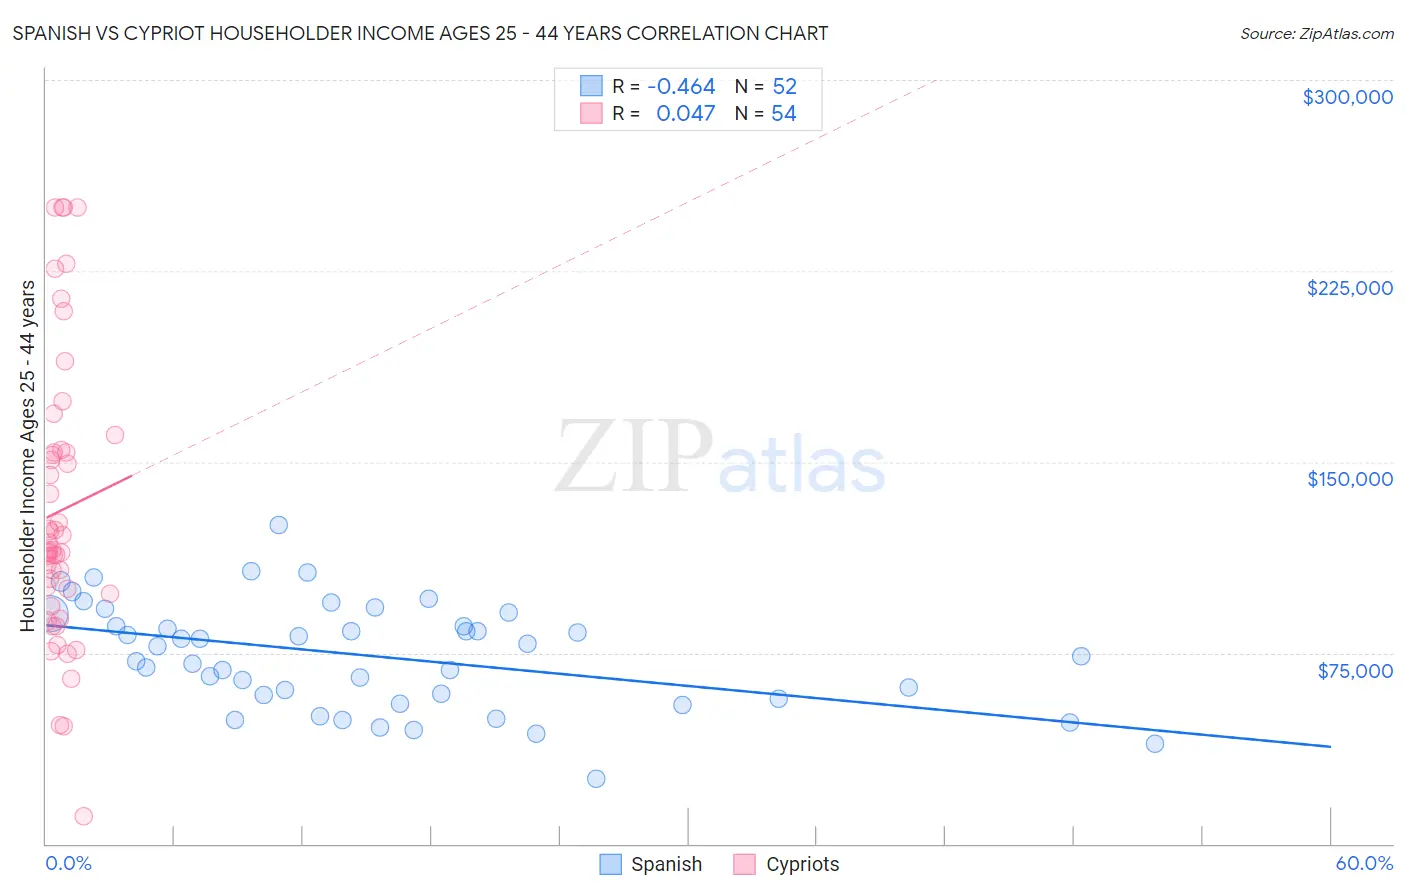 Spanish vs Cypriot Householder Income Ages 25 - 44 years